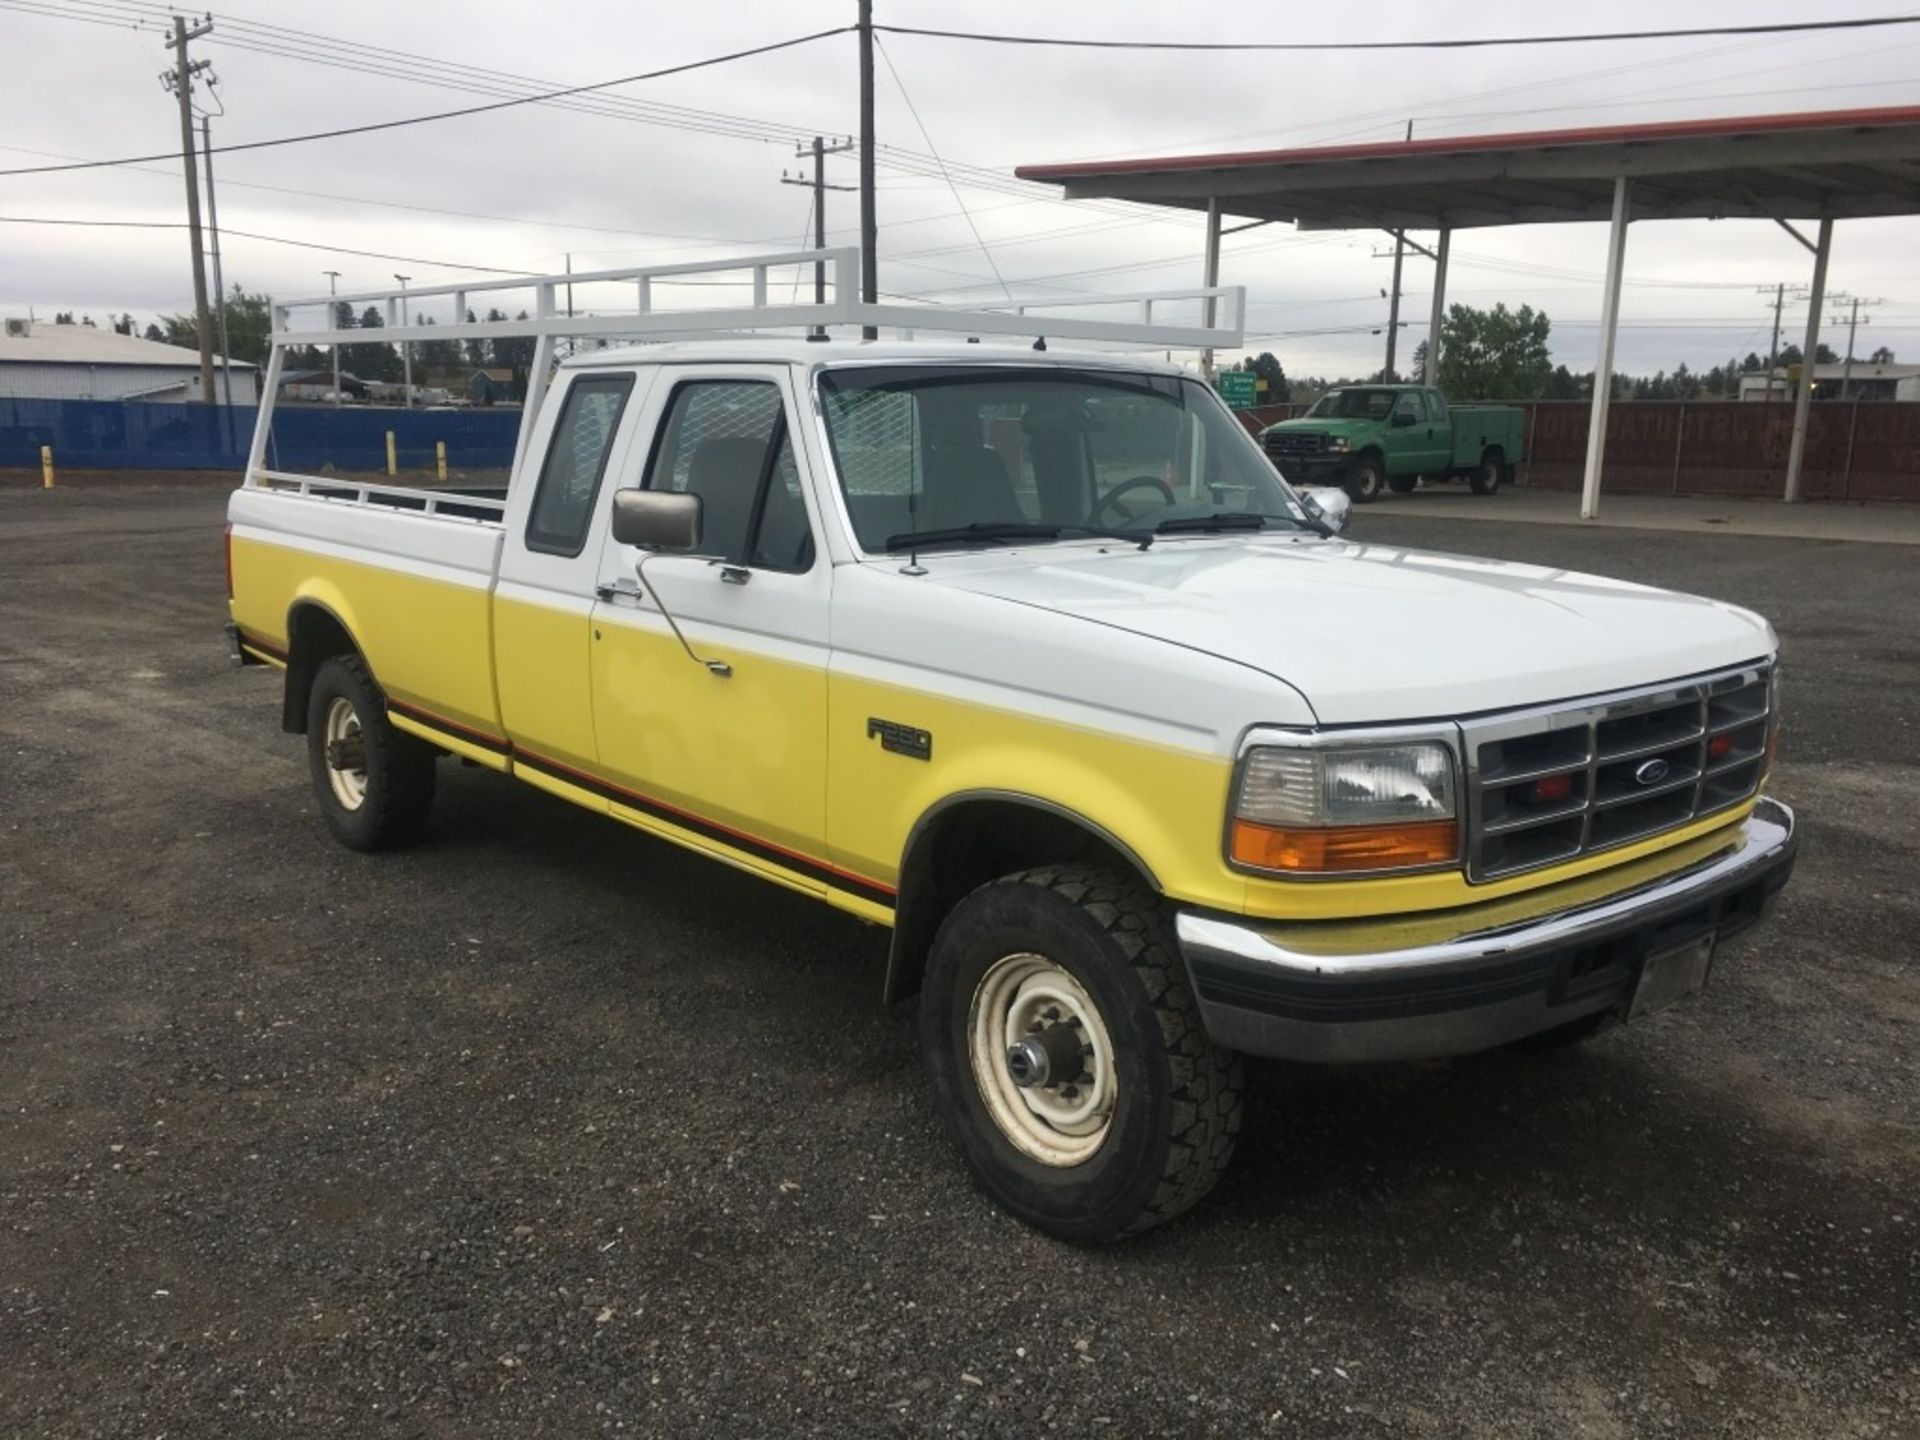 1996 Ford F250 XLT 4x4 Extra Cab Pickup - Image 4 of 20